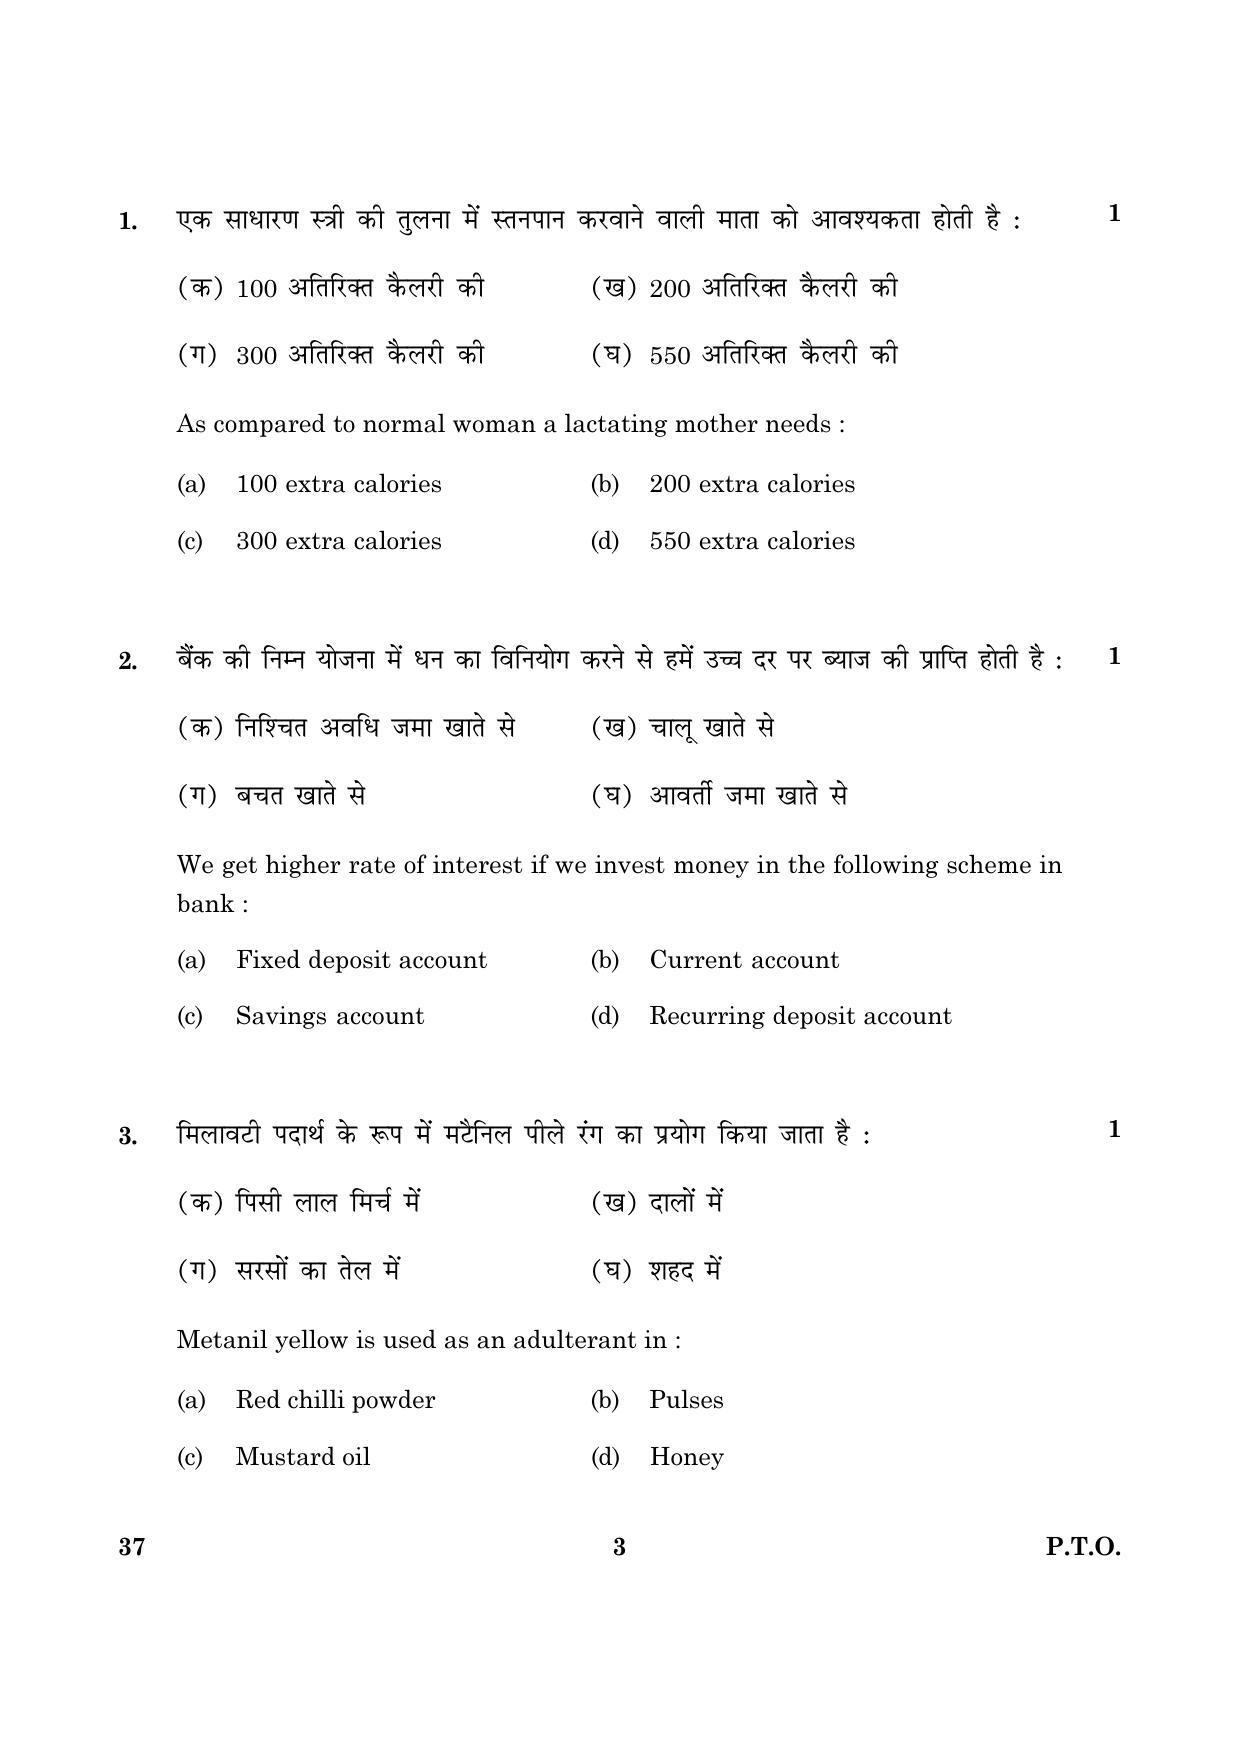 CBSE Class 10 037 Home Science 2016 Question Paper - Page 3